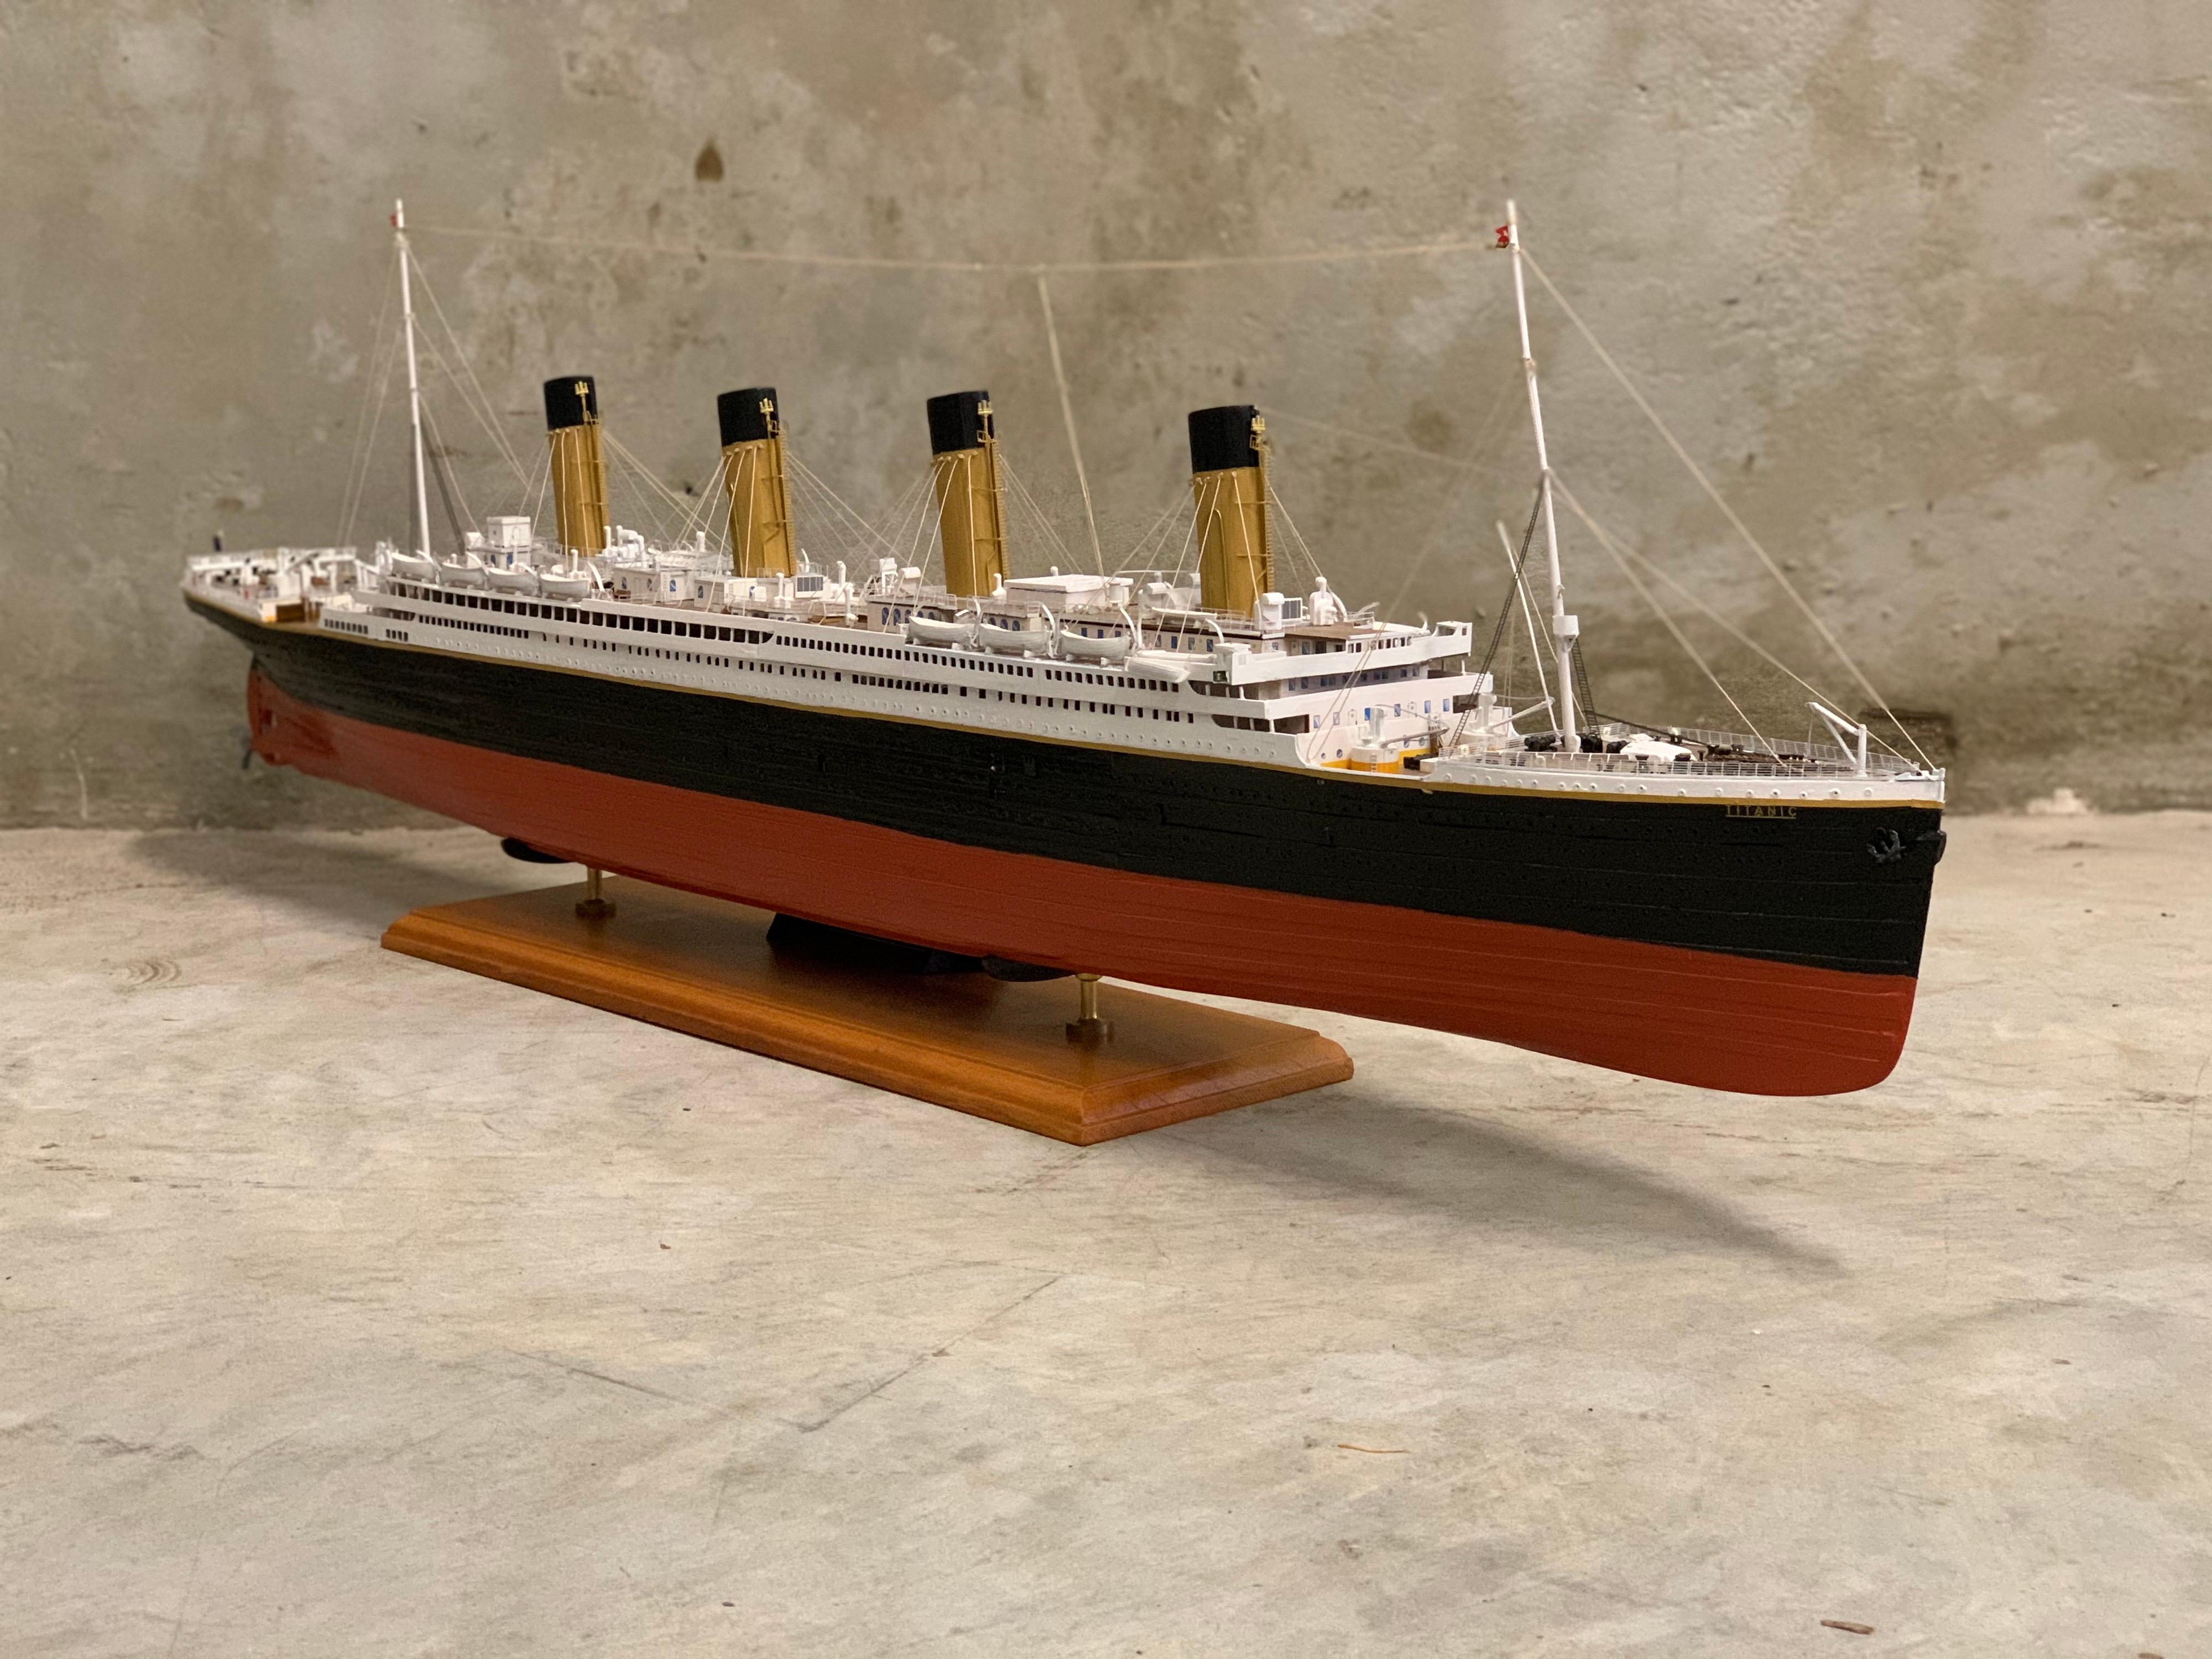 Beautiful handmade modelship of the famous R.M.S. Titanic. Made in over a 1000 hours of a 5 star kit by a schipbuilding enthusiast and was finished in 2009. Stunning details made entirely from wood with metal and brass parts. The ship is placed on a